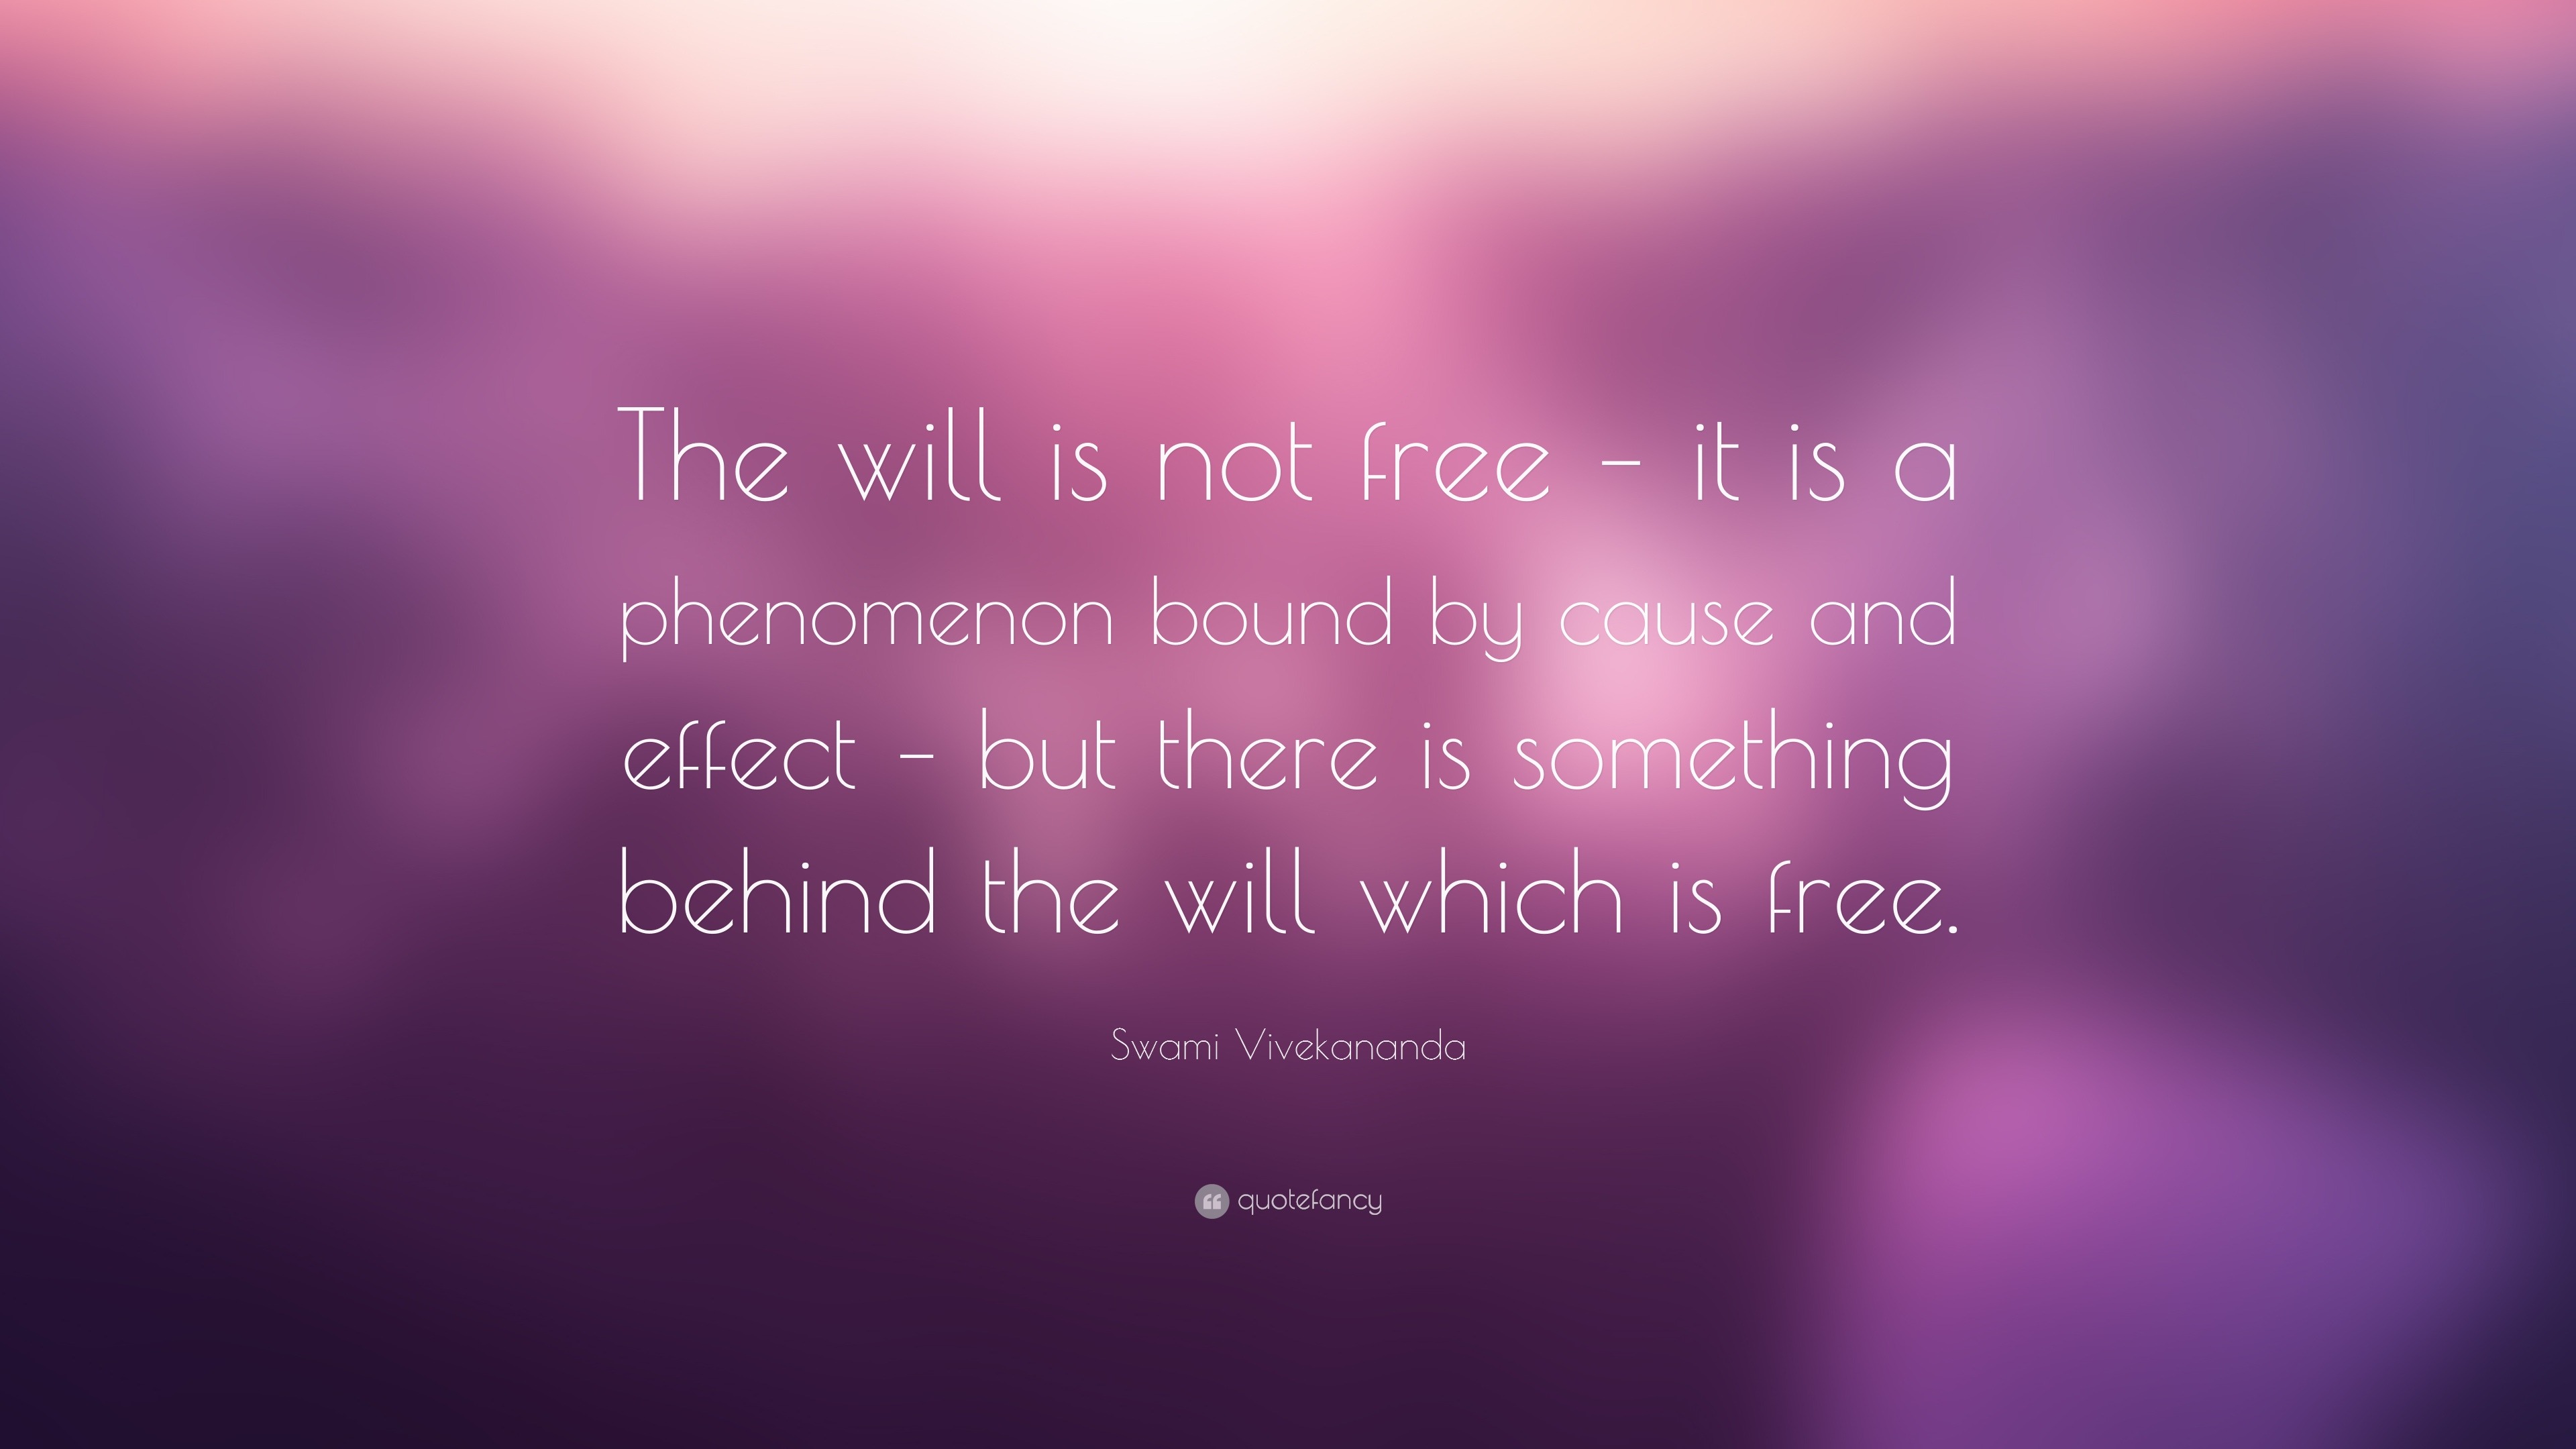 Swami Vivekananda Quote: “The will is not free – it is a phenomenon ...